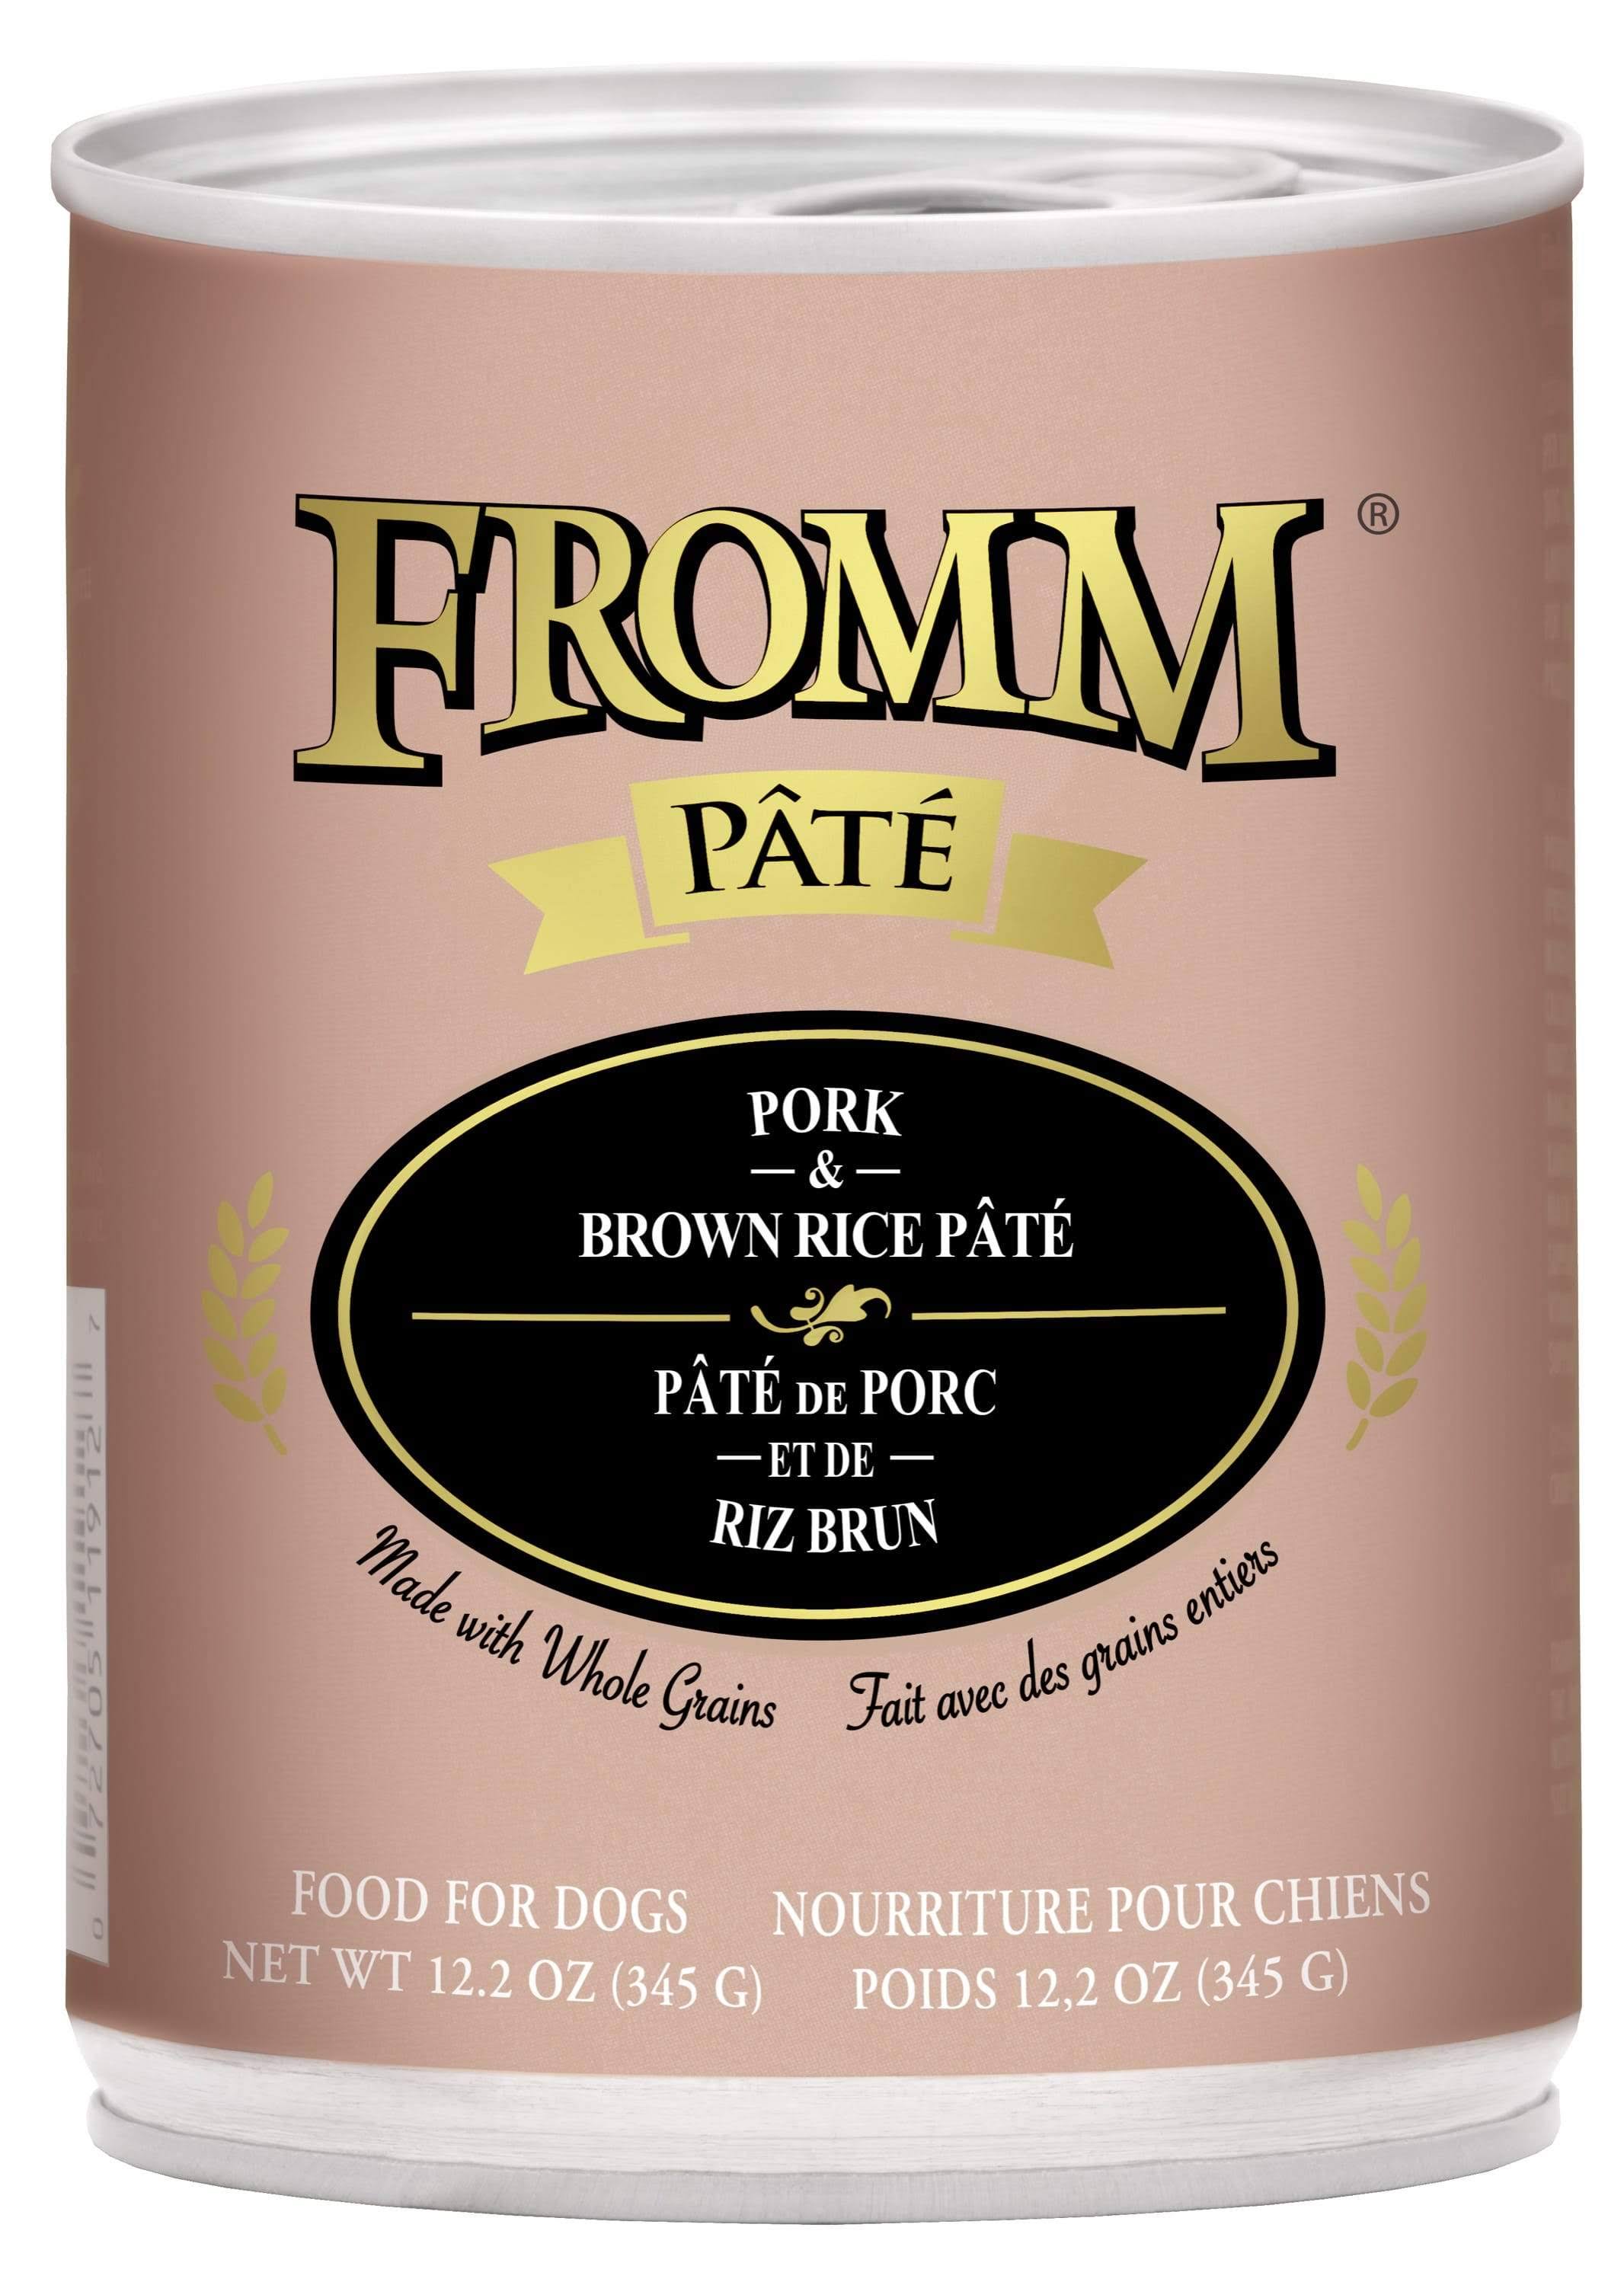 Fromm Pork & Brown Rice Pate Canned Dog Food